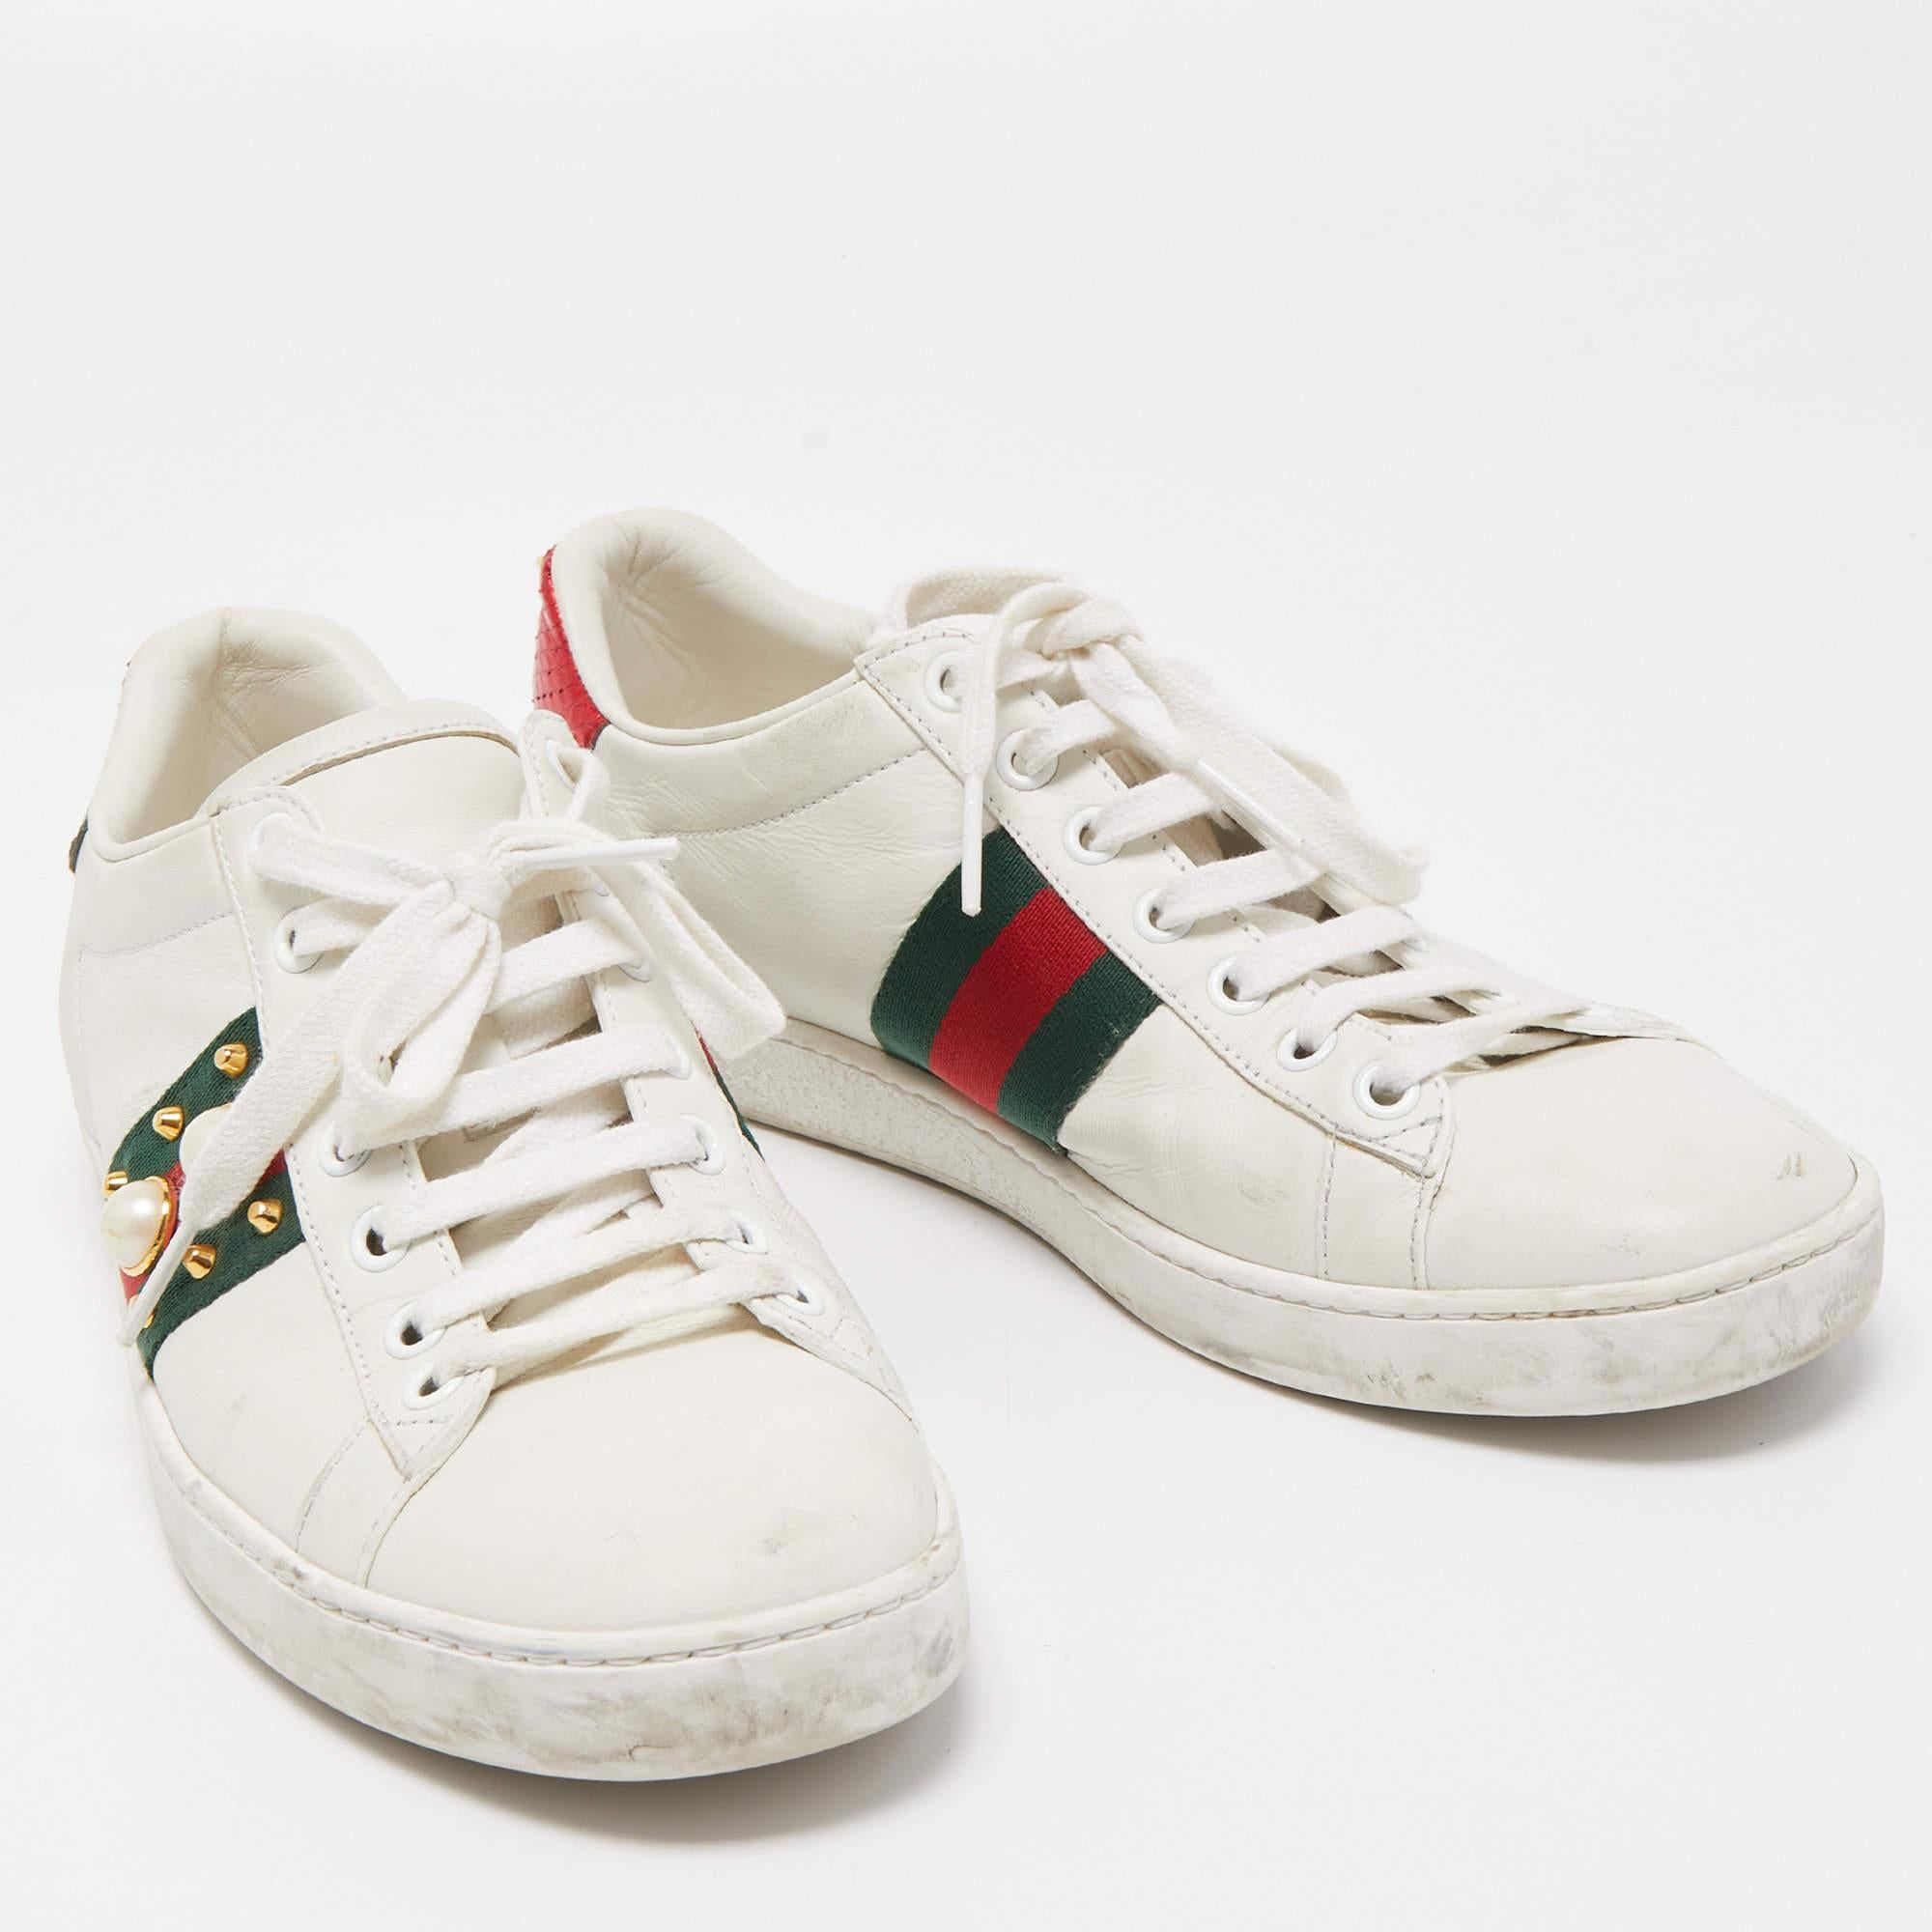 Gucci White Leather Faux Pearl Embellished Ace Sneakers Size 37.5 1